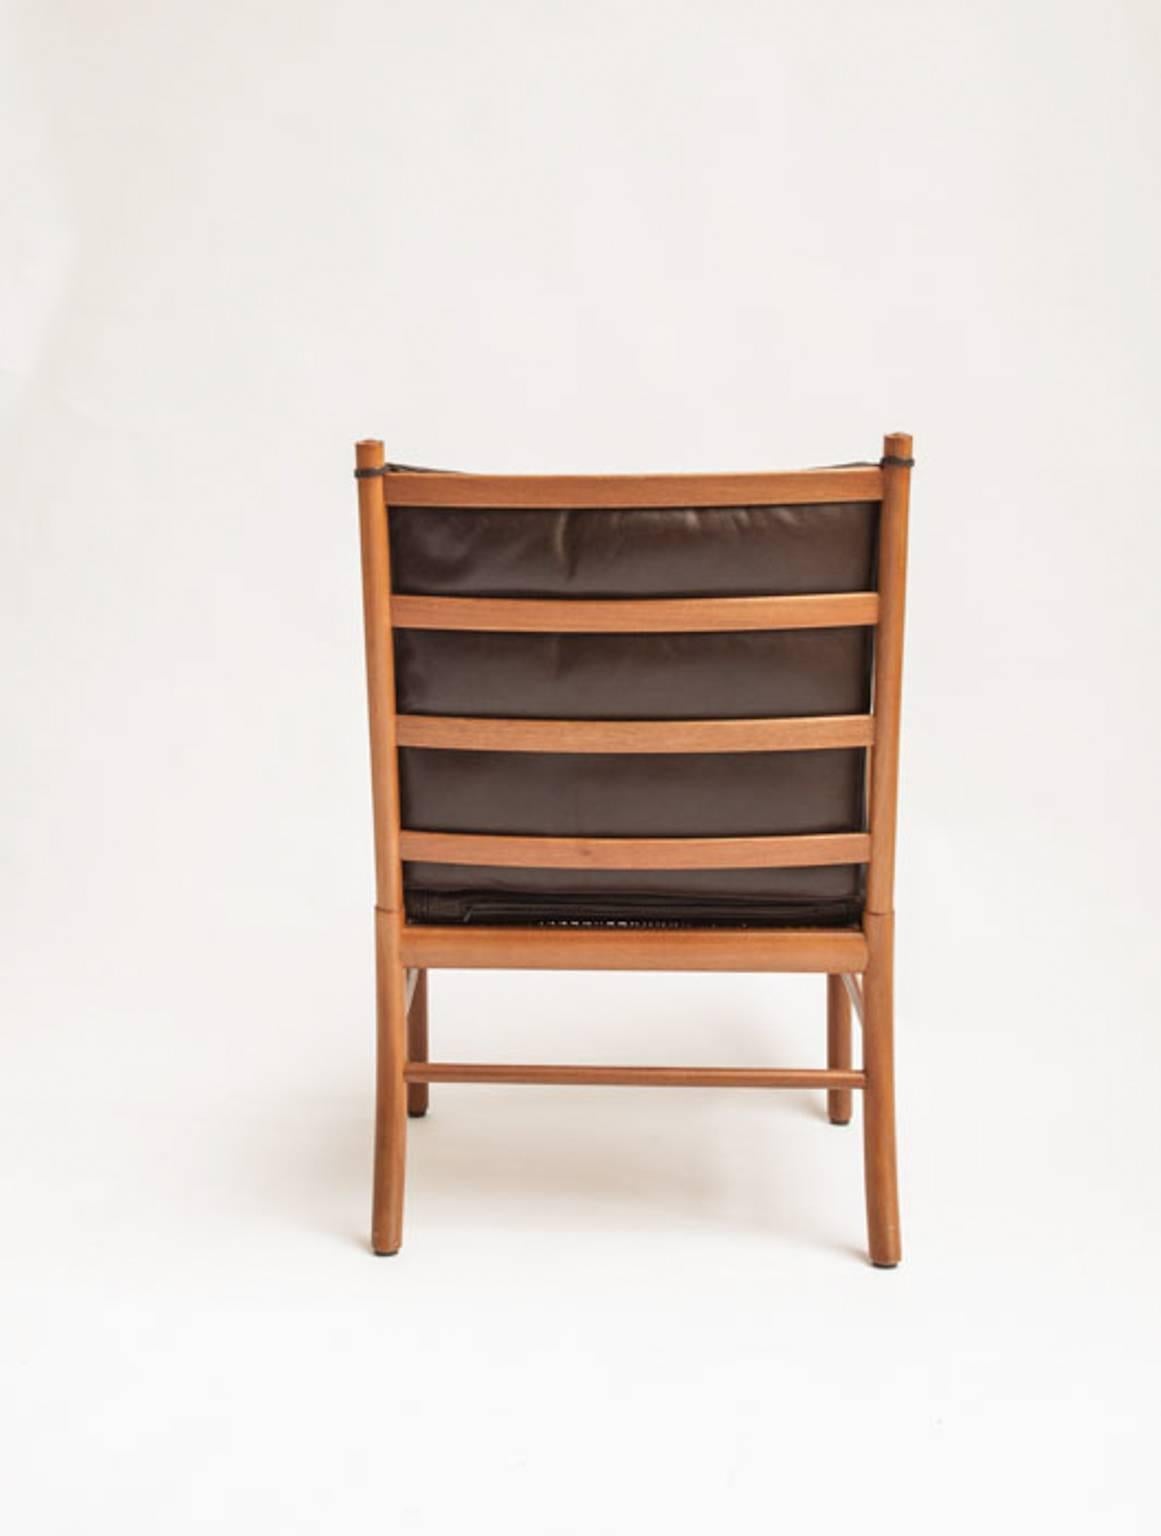 Beautiful vintage Colonial chair, model PJ 149. Lounge chair with mahogany frame. Woven cane seat. Back and seat cushions filled with down, and upholstered in dark brown leather. Designed in 1949. Produced by P. Jeppesens Møbelfabrik in